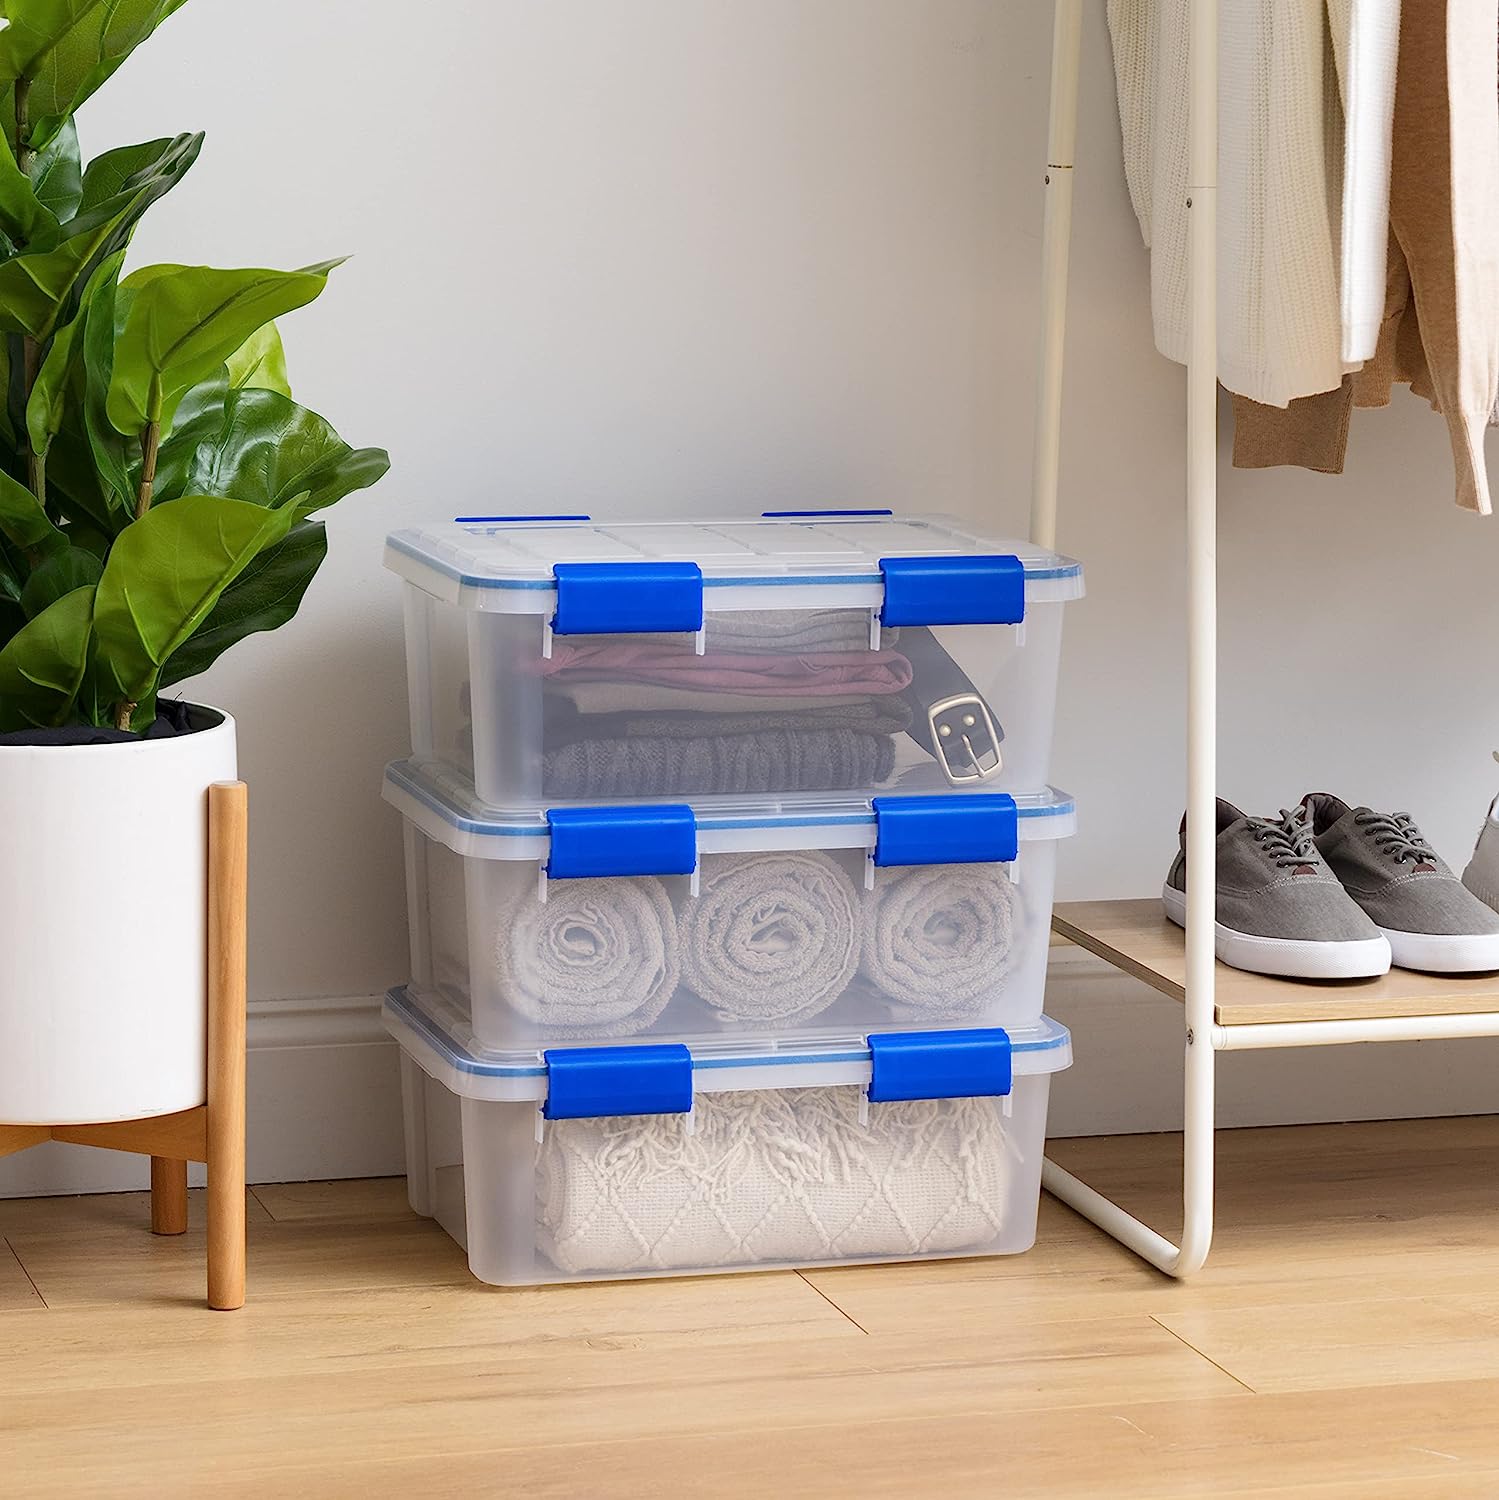 https://bigbigmart.com/wp-content/uploads/2023/06/IRIS-USA-16-Quart-WEATHERPRO-Plastic-Storage-Box-with-Durable-Lid-and-Seal-and-Secure-Latching-Buckles-Clear-With-Blue-Buckles-Weathertight-3-Pack9.jpg